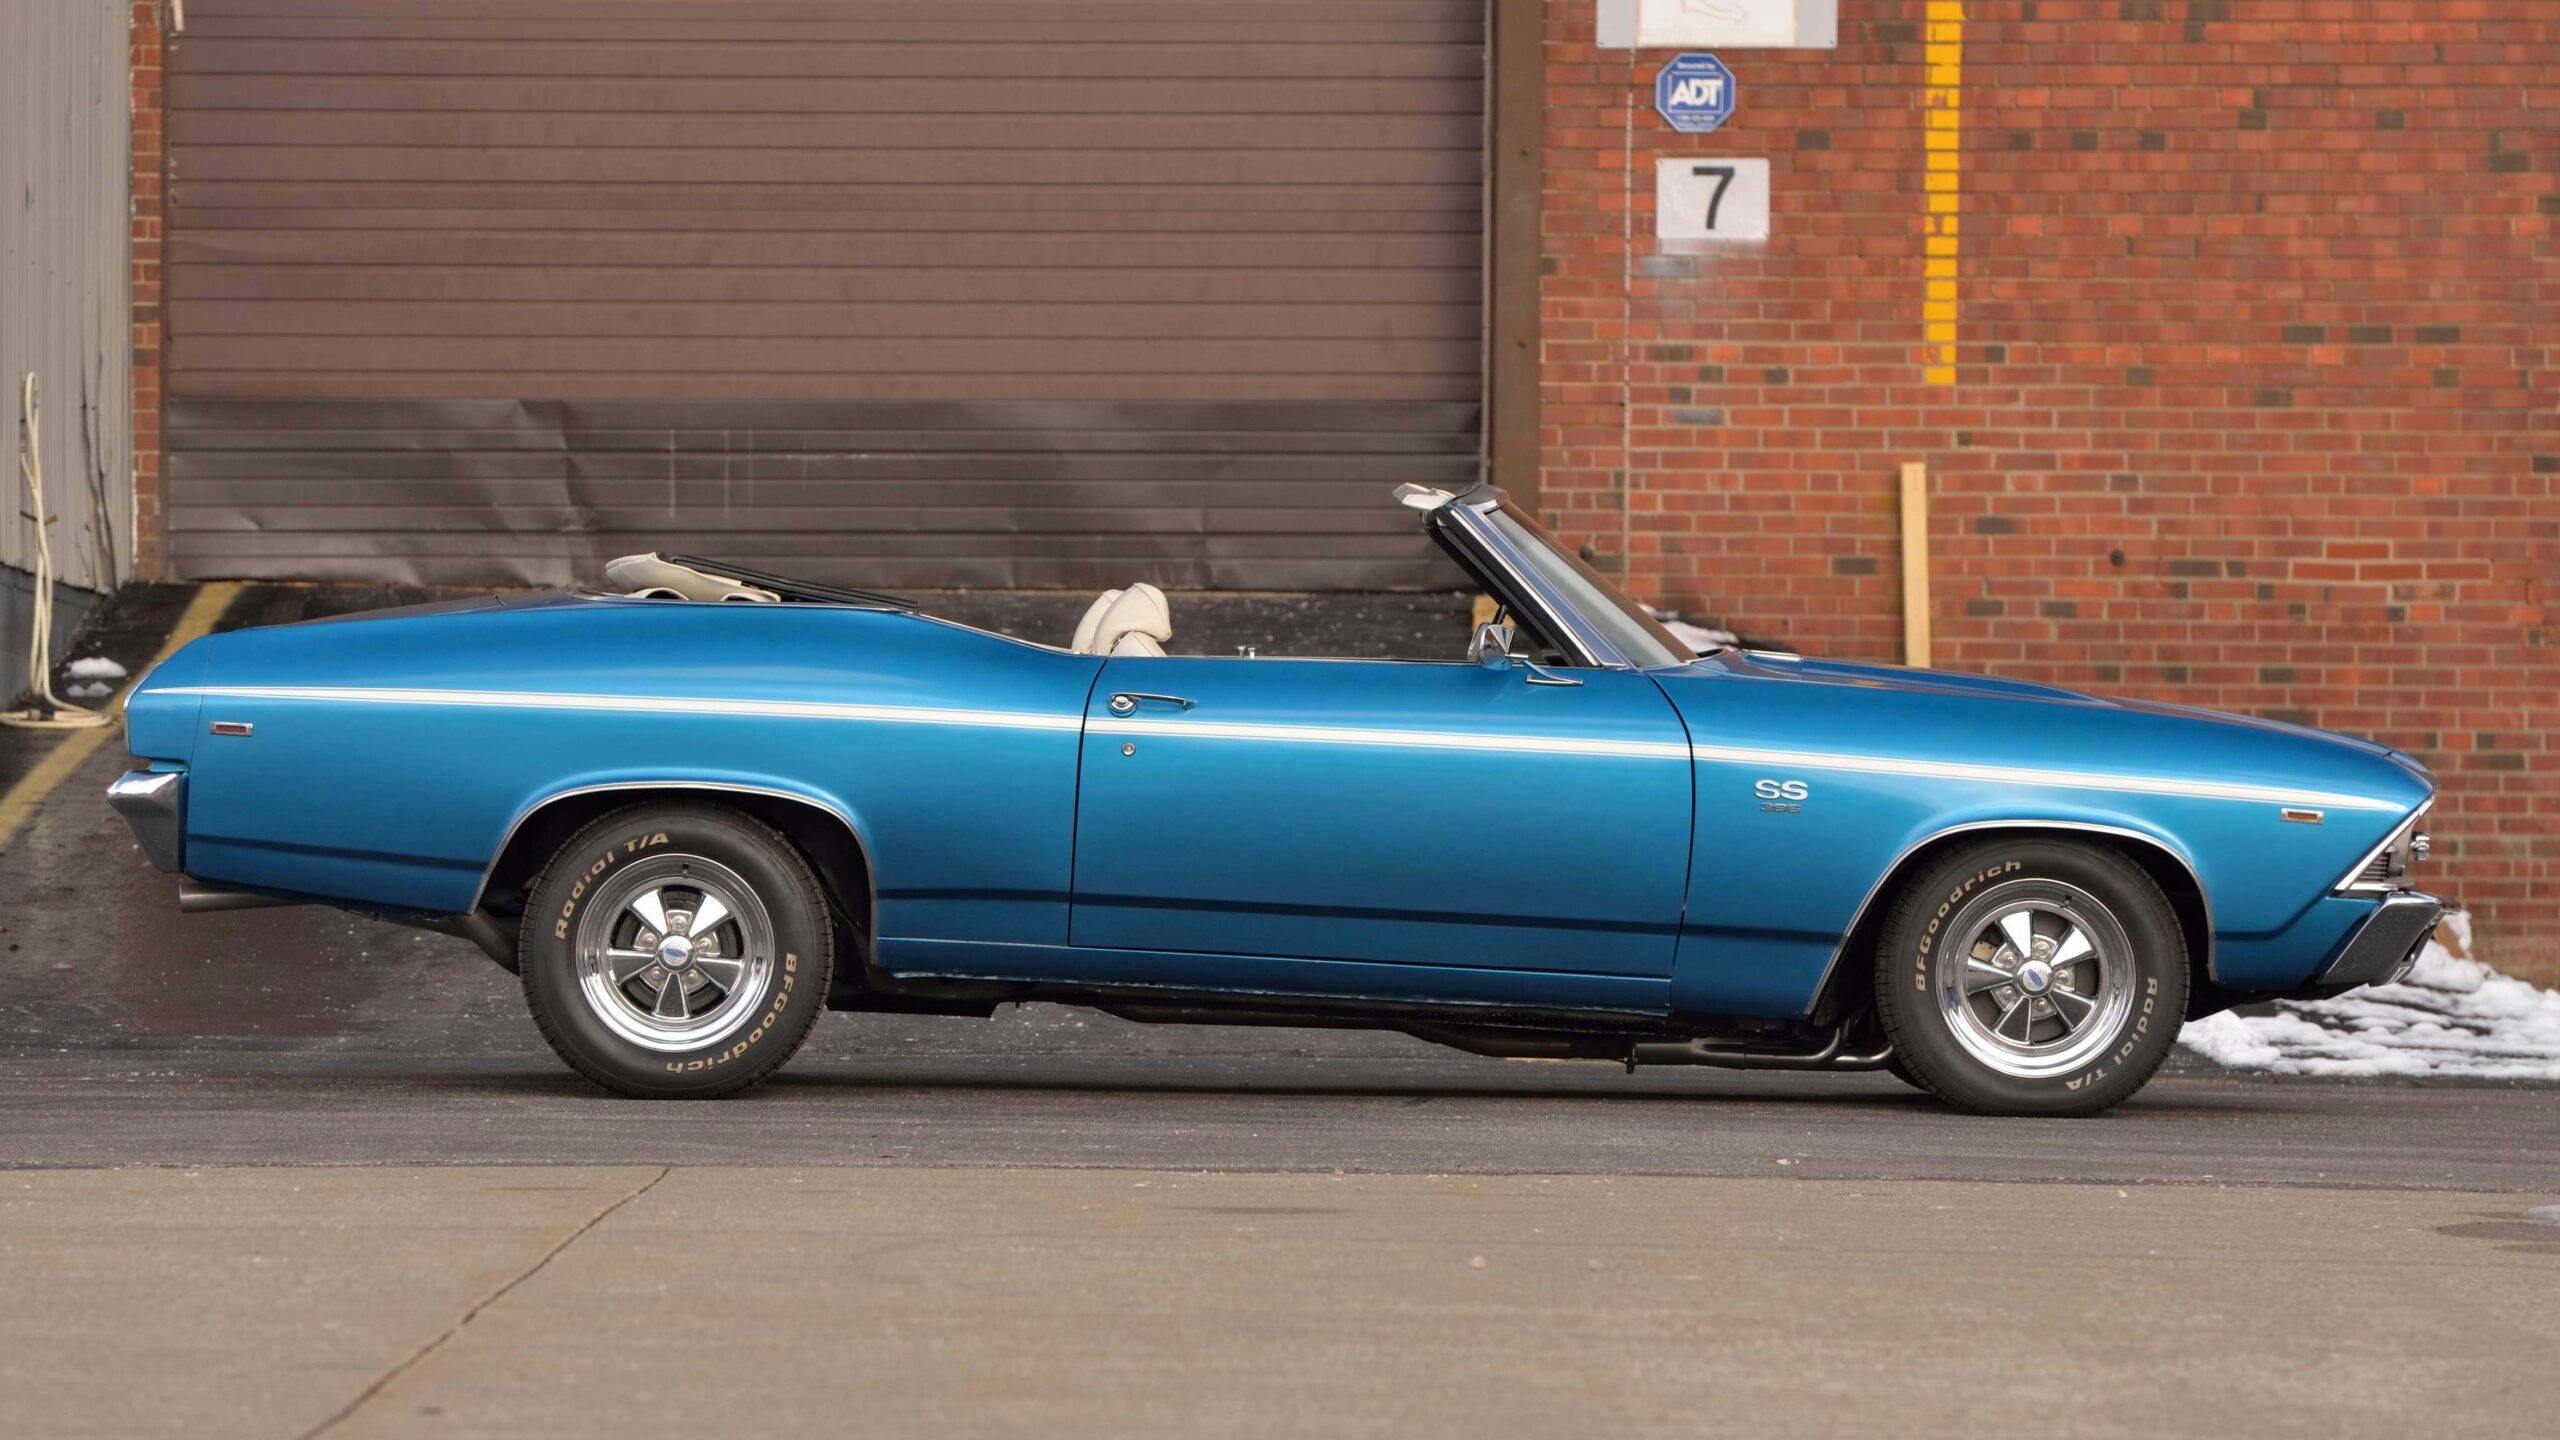 Bruce Springsteen 1969 Chevrolet Chevelle Convertible side profile